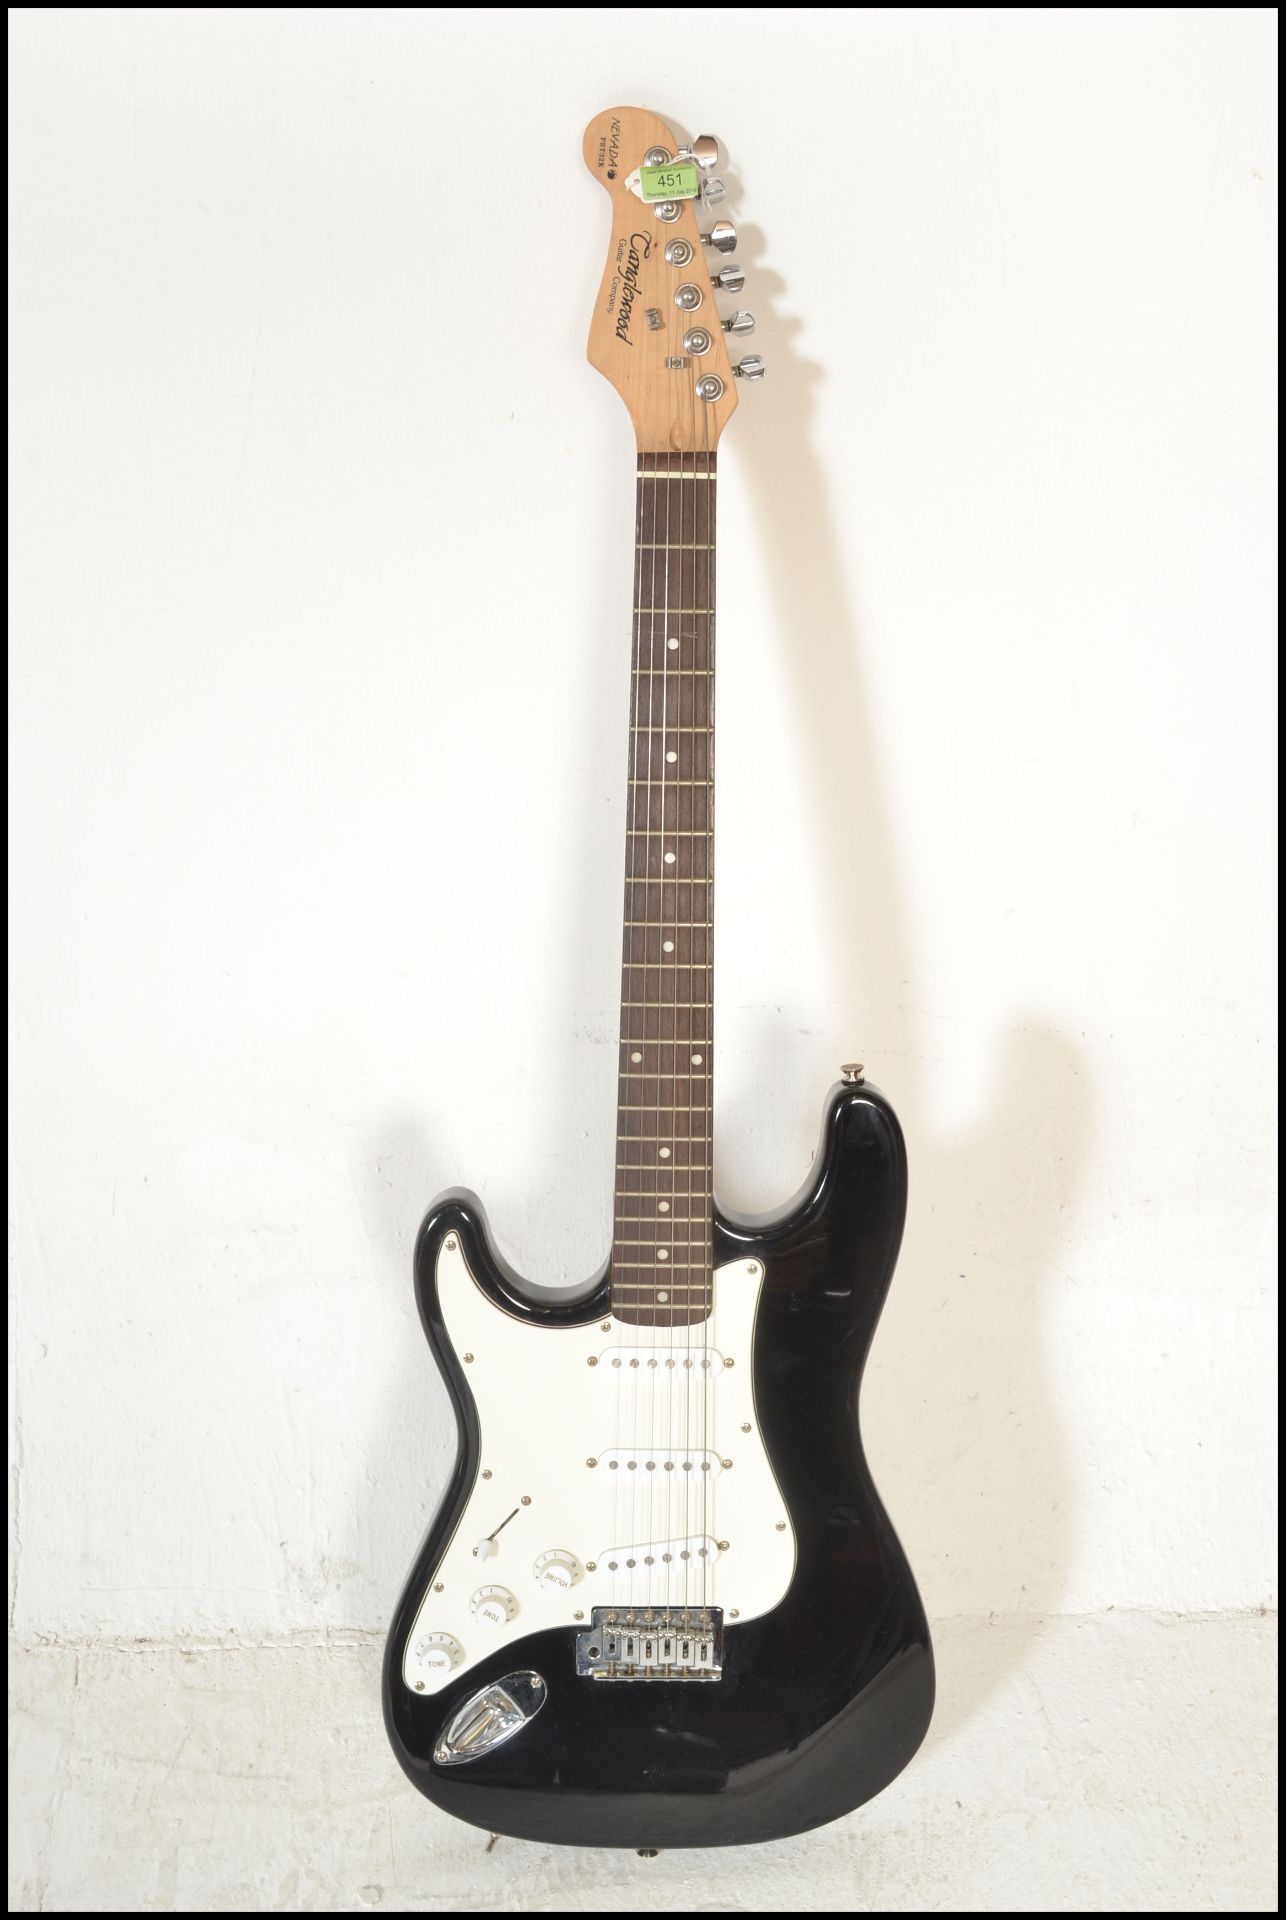 A six string electric guitar by Tanglewood Nevada